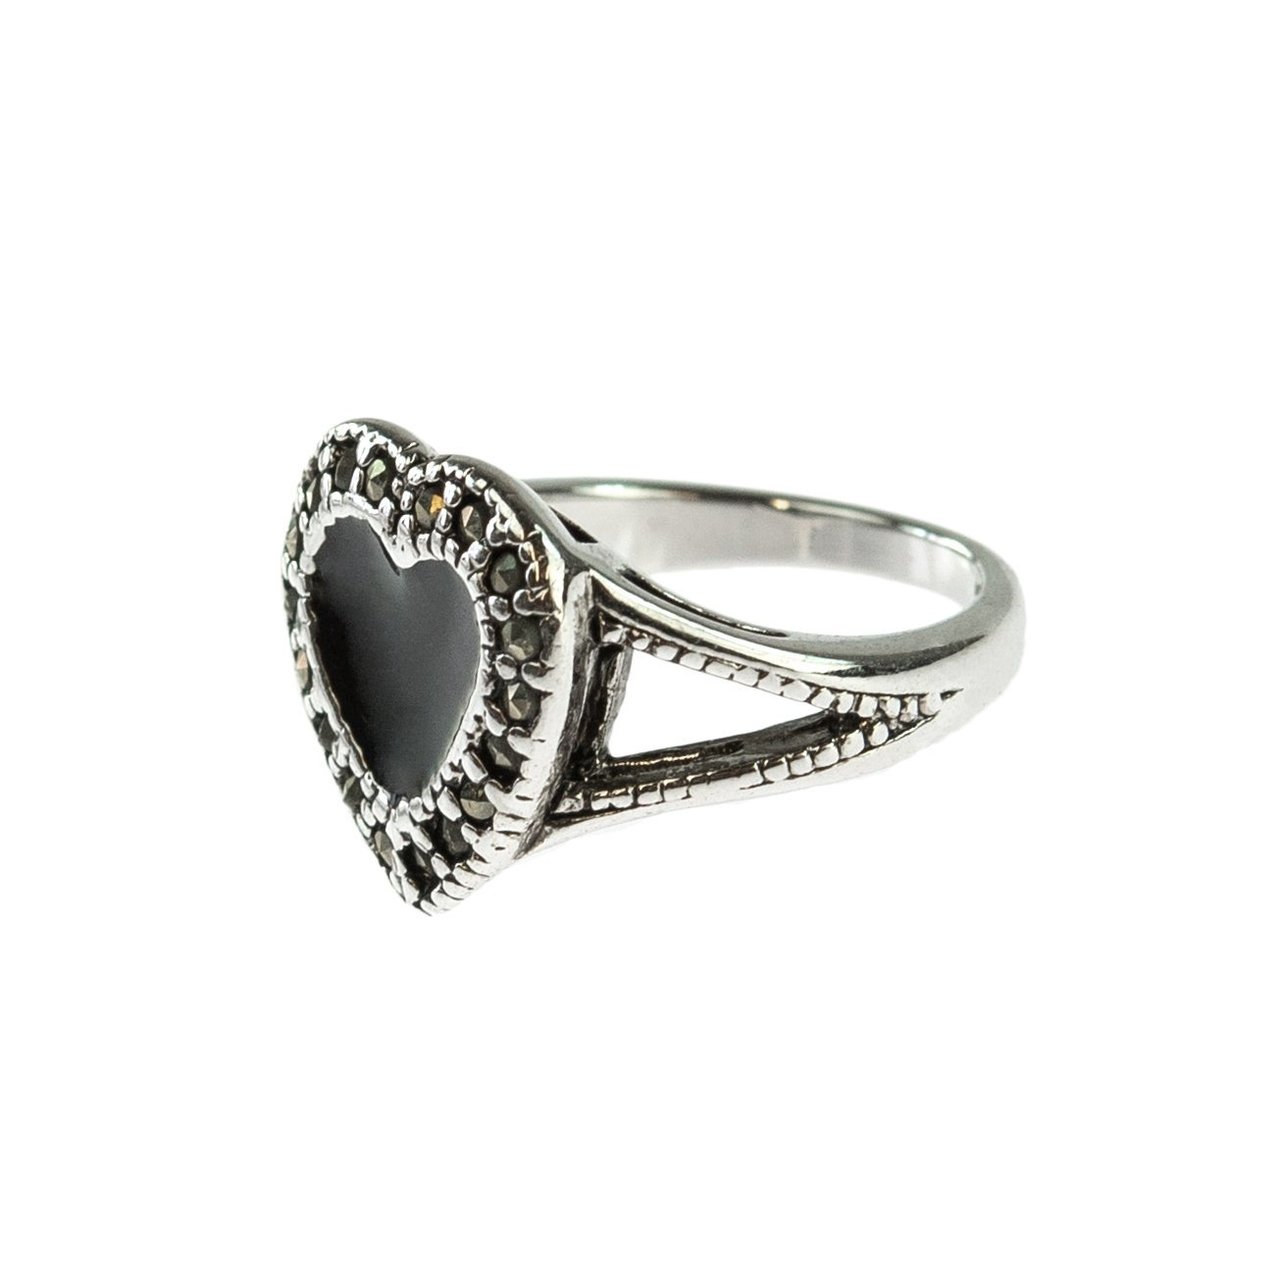 DOUBLE DOSE LOVE - STATEMENT SILVER RING